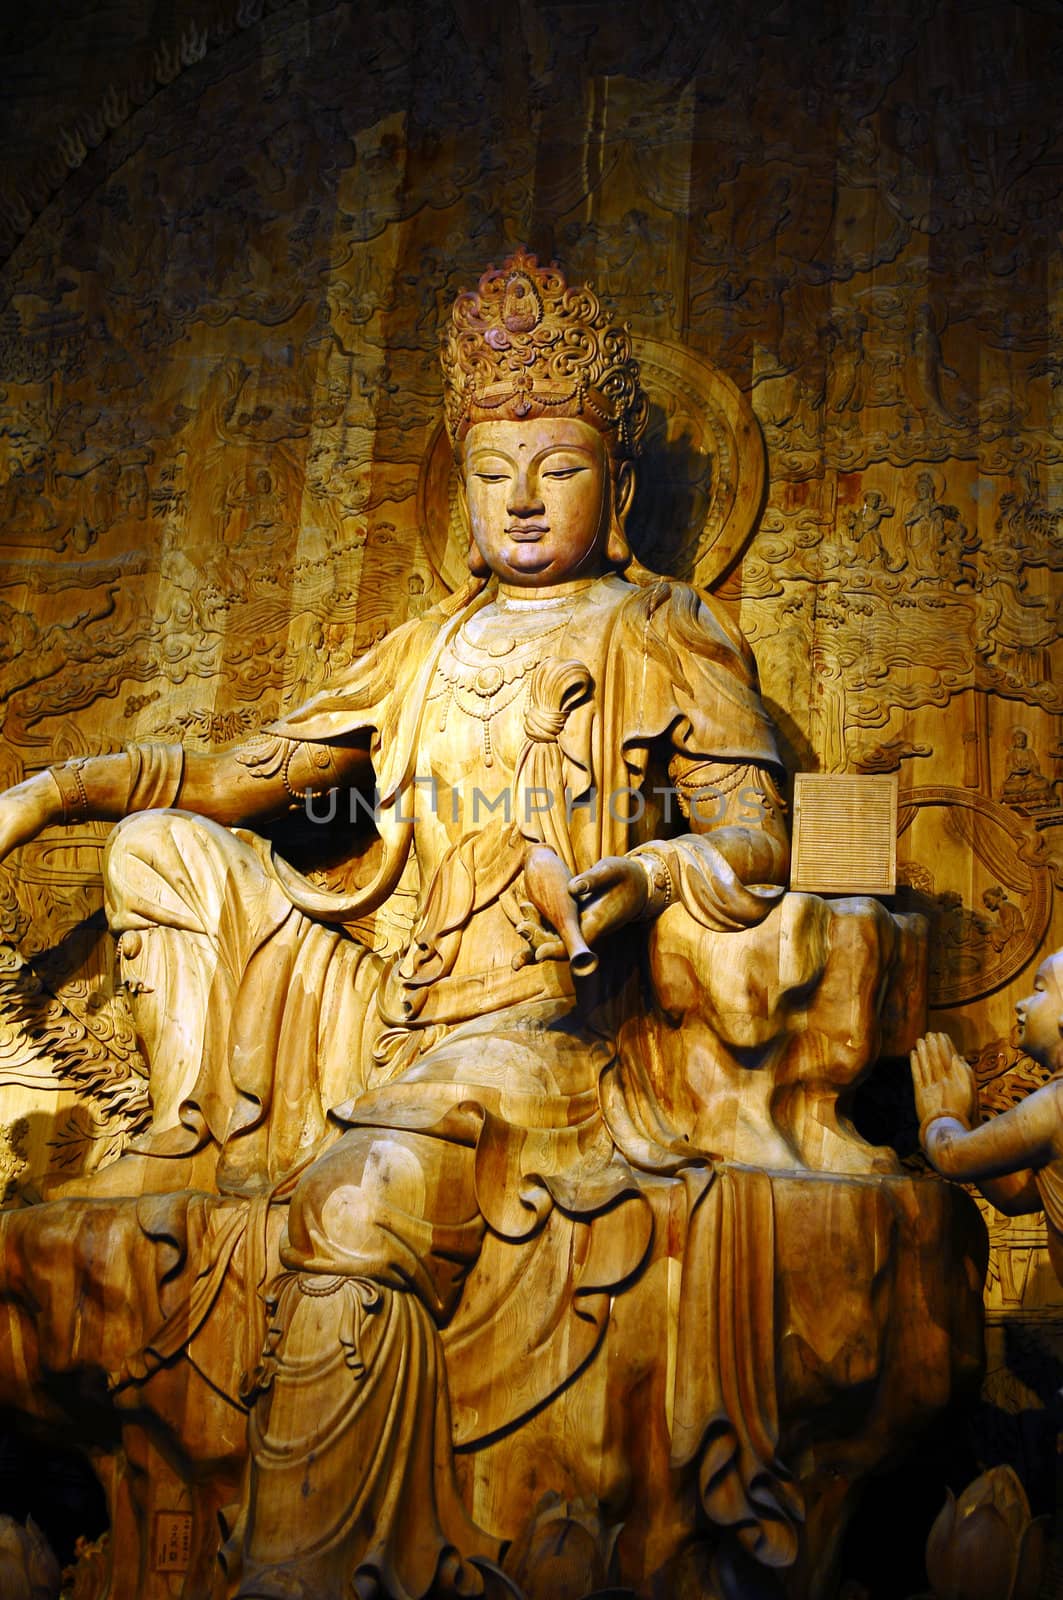 Wood-carving Buddha statue in a traditional Chinese ancient temple